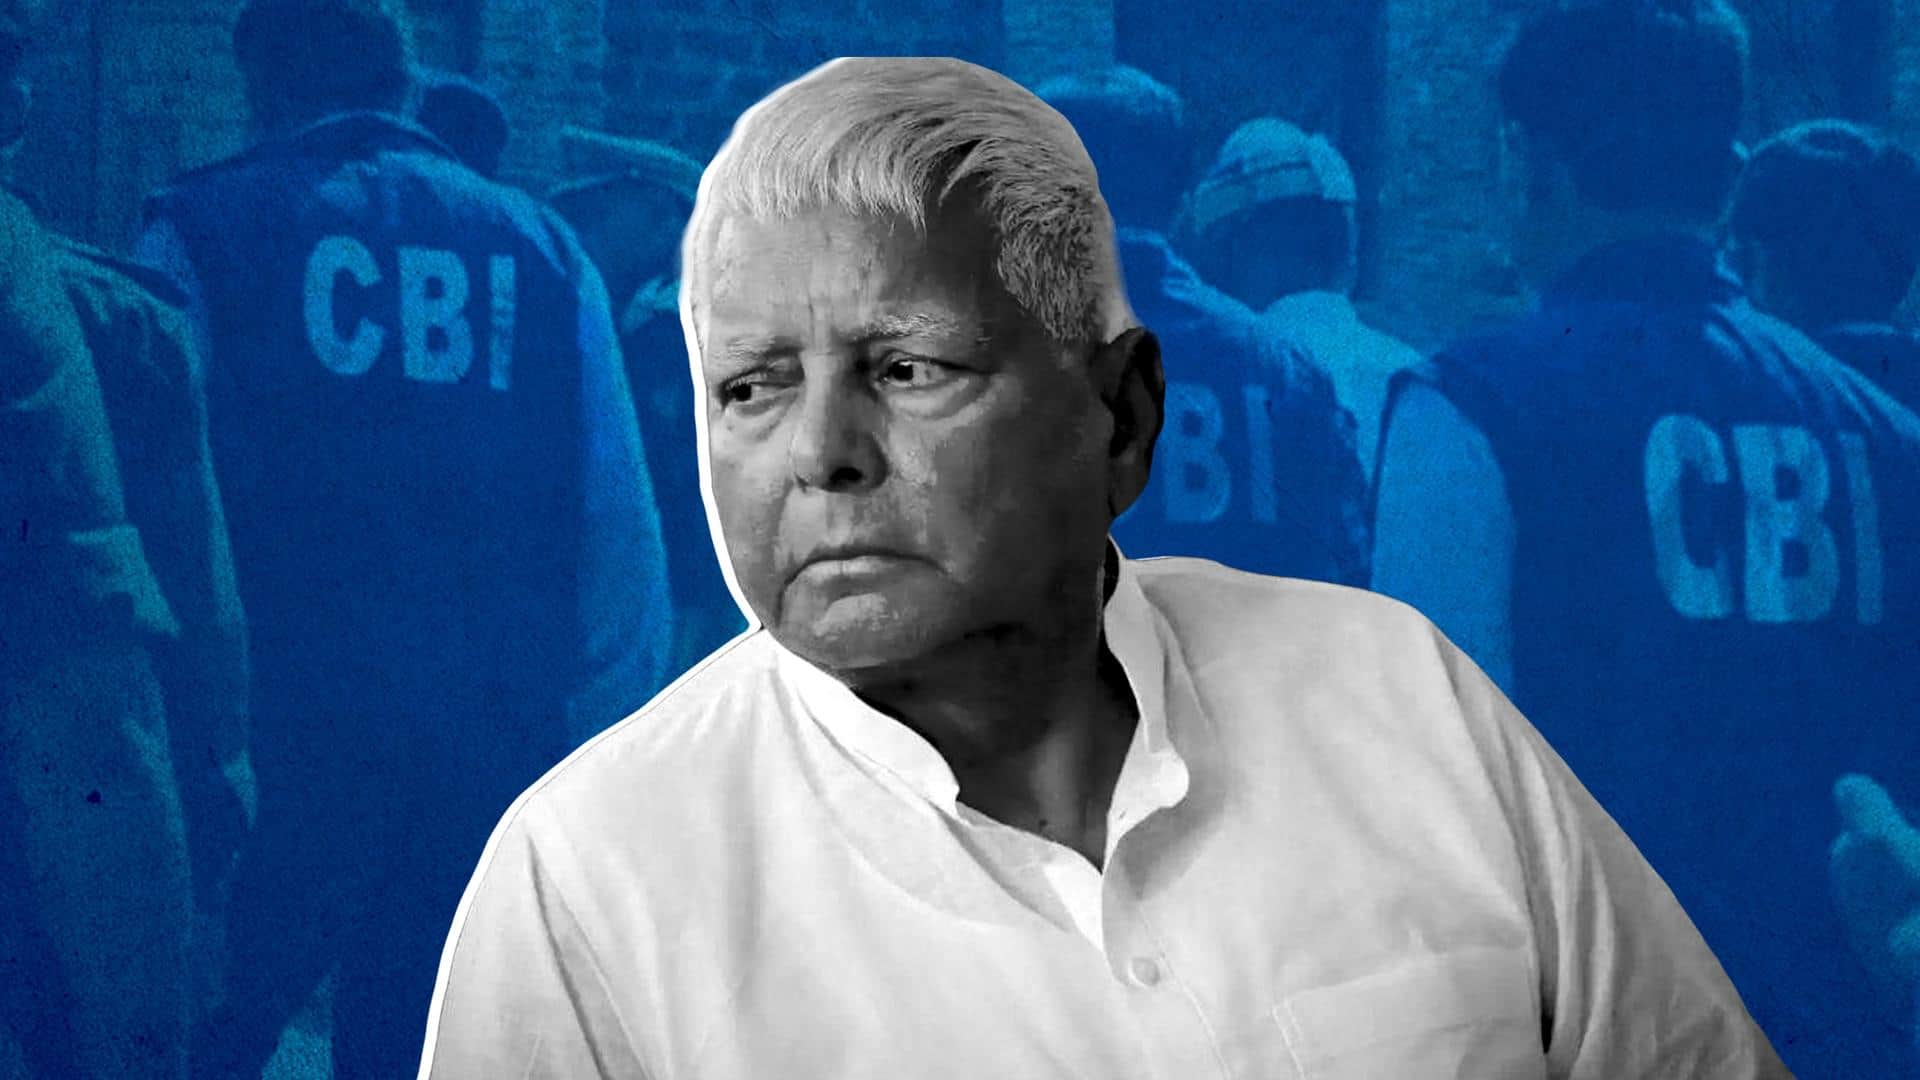 Land-for-jobs scam: Now, CBI questions Lalu Yadav; daughter alleges harassment